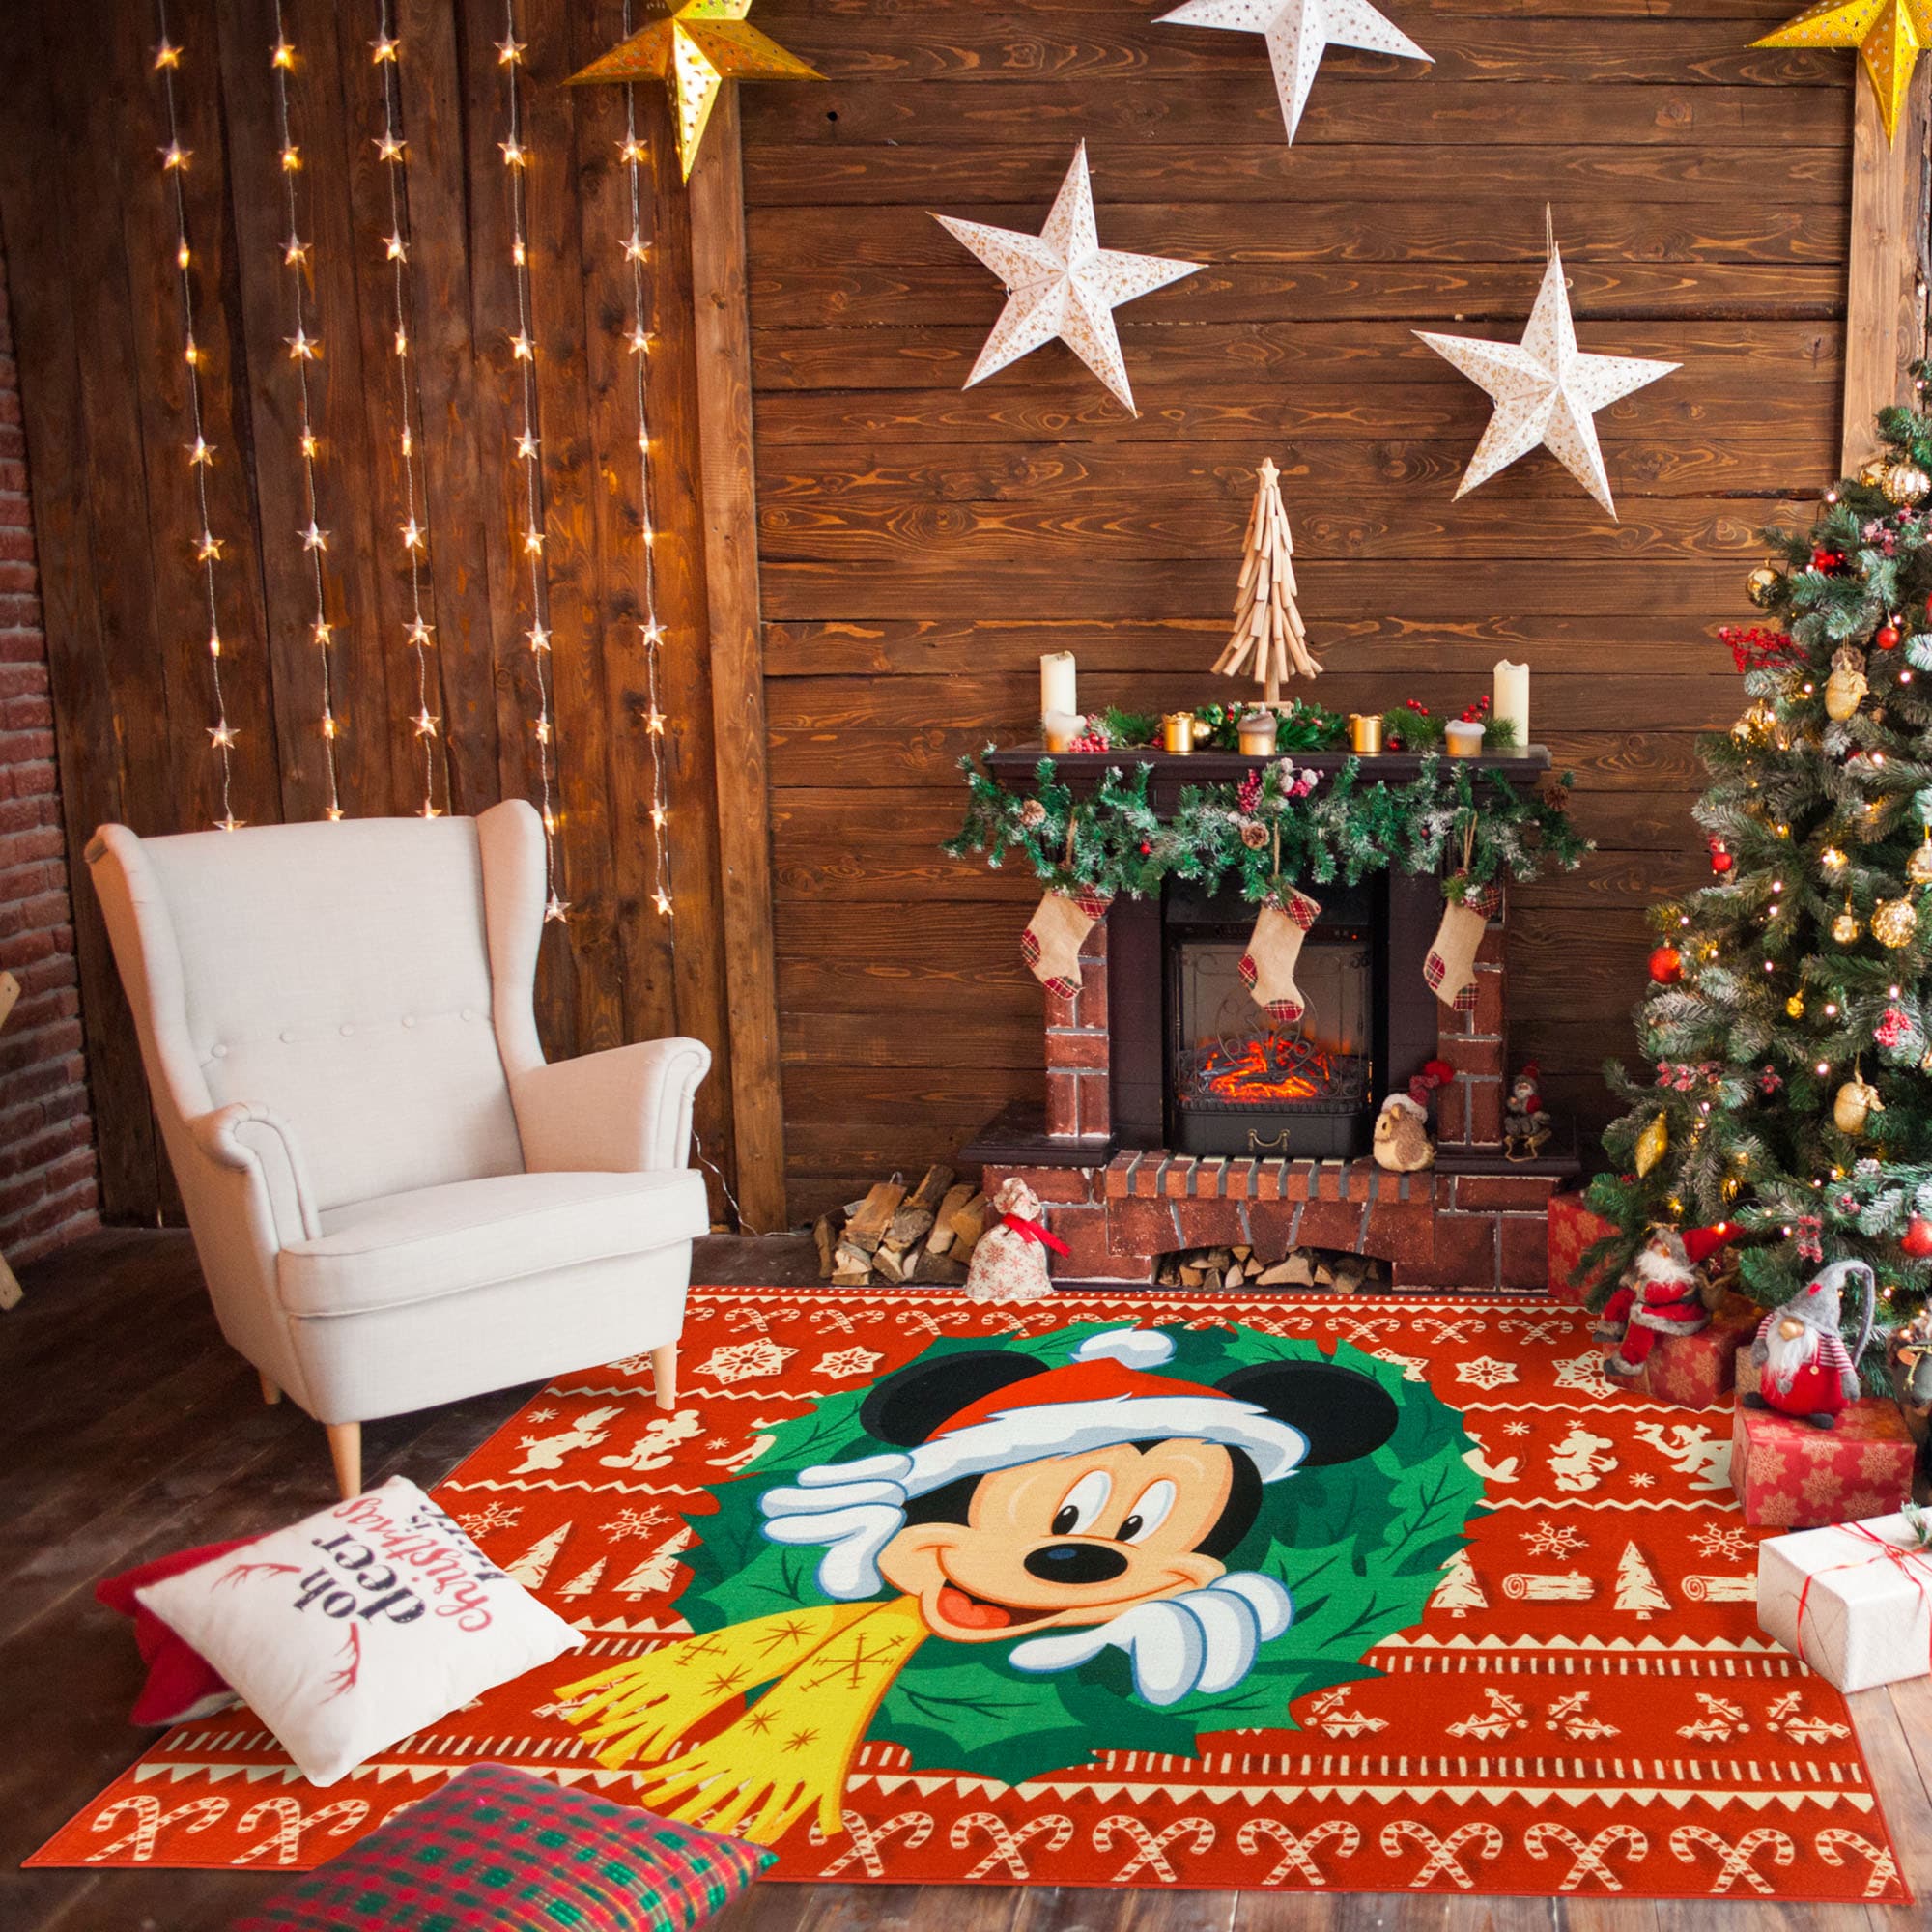 Disney 78-in Wreath Rug in the Outdoor Christmas Decorations ...